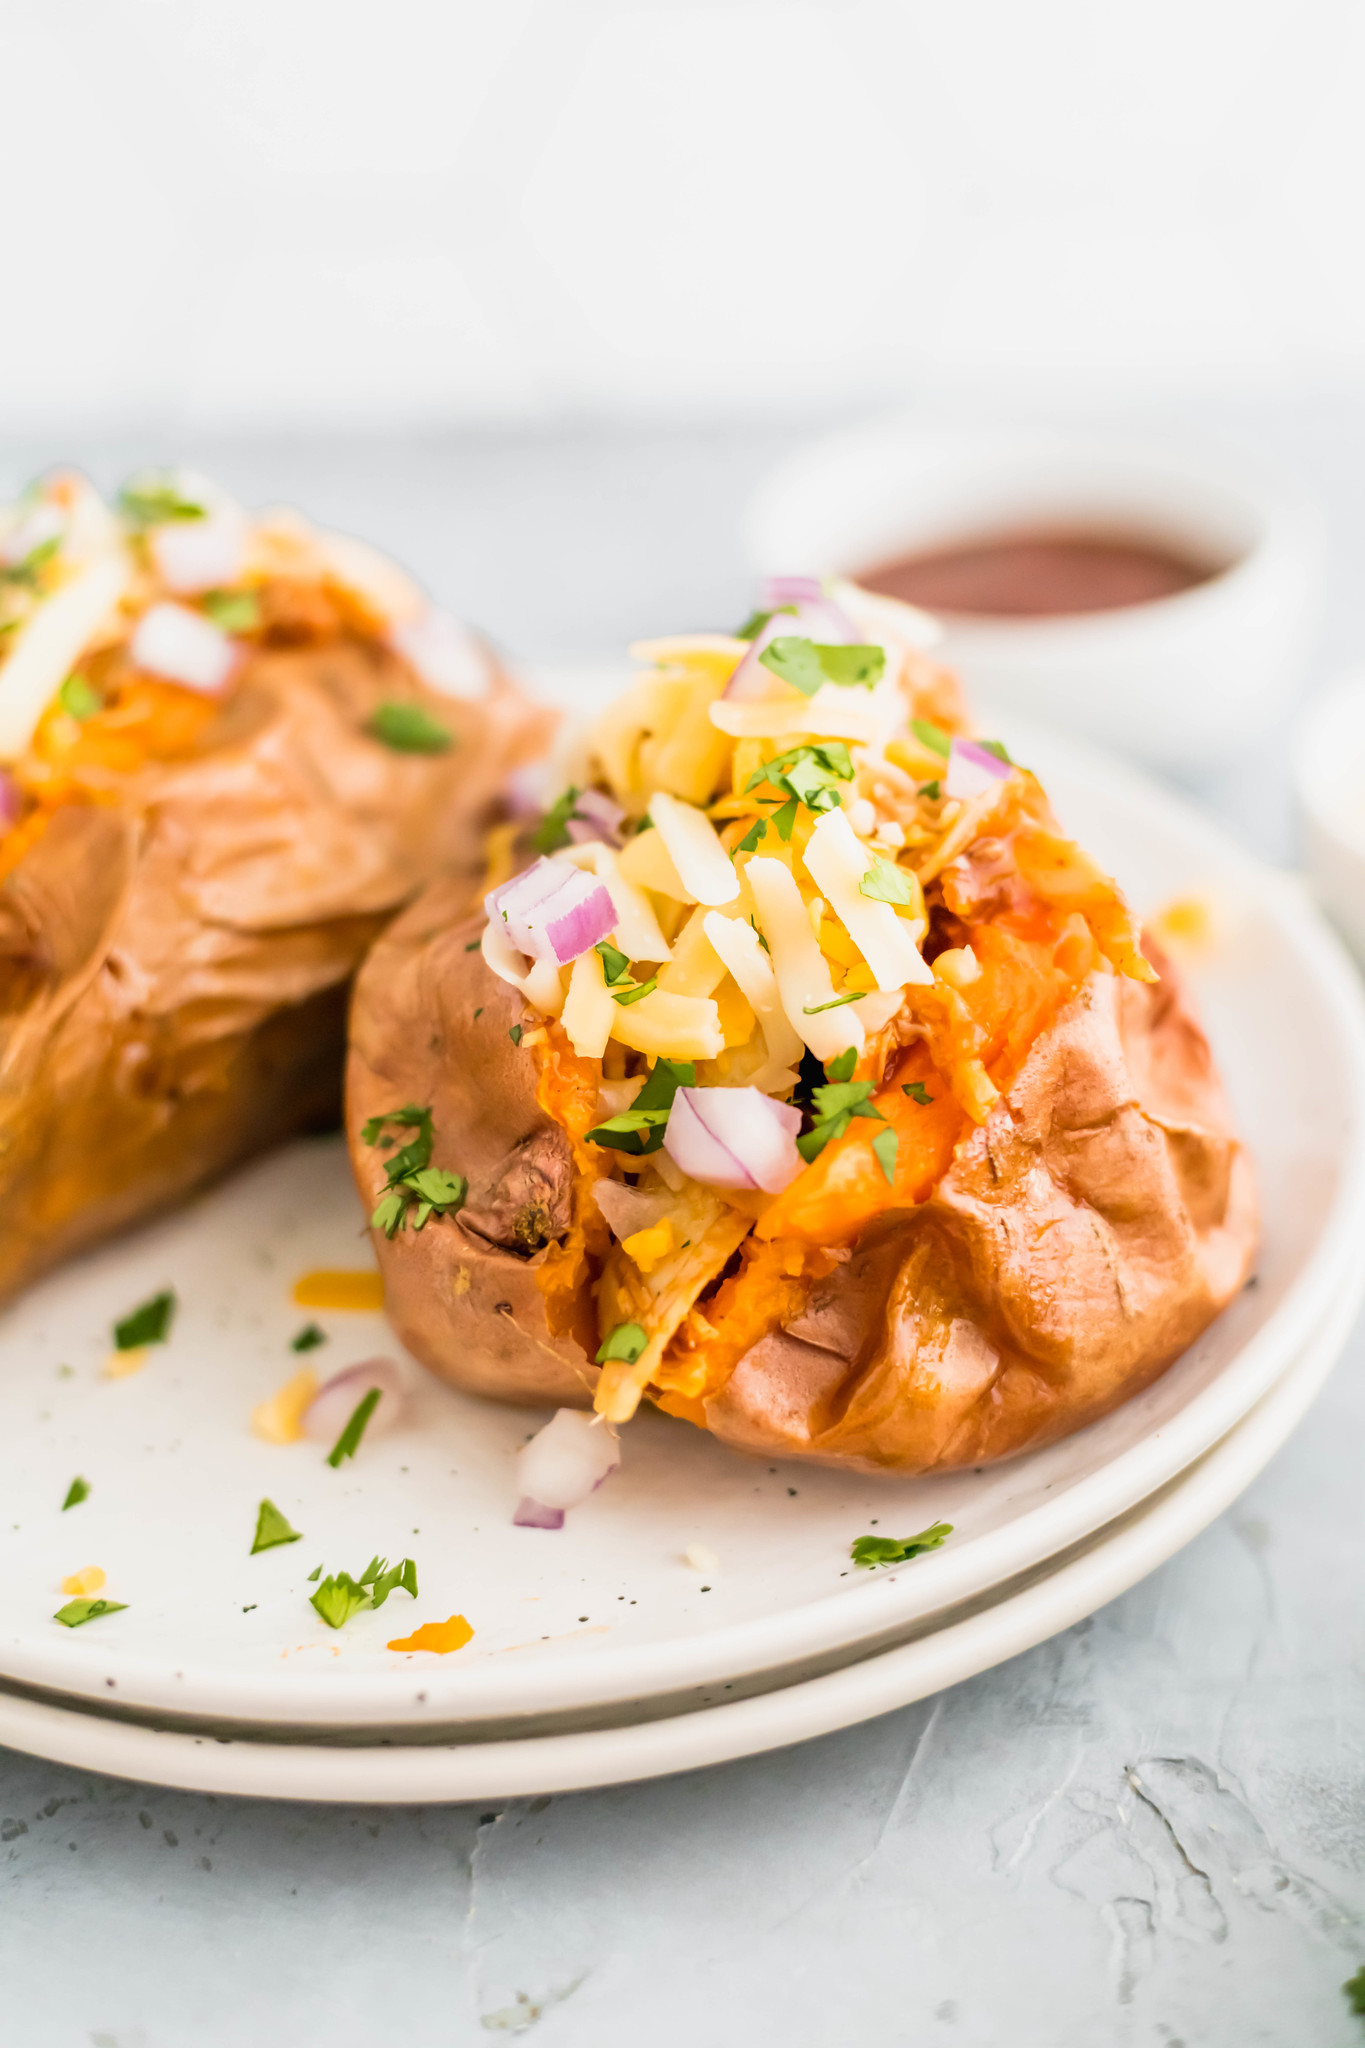 Eating healthy doesn't have to be boring. Especially with these BBQ Chicken Stuffed Sweet Potatoes around. Simple to prep and so yummy.